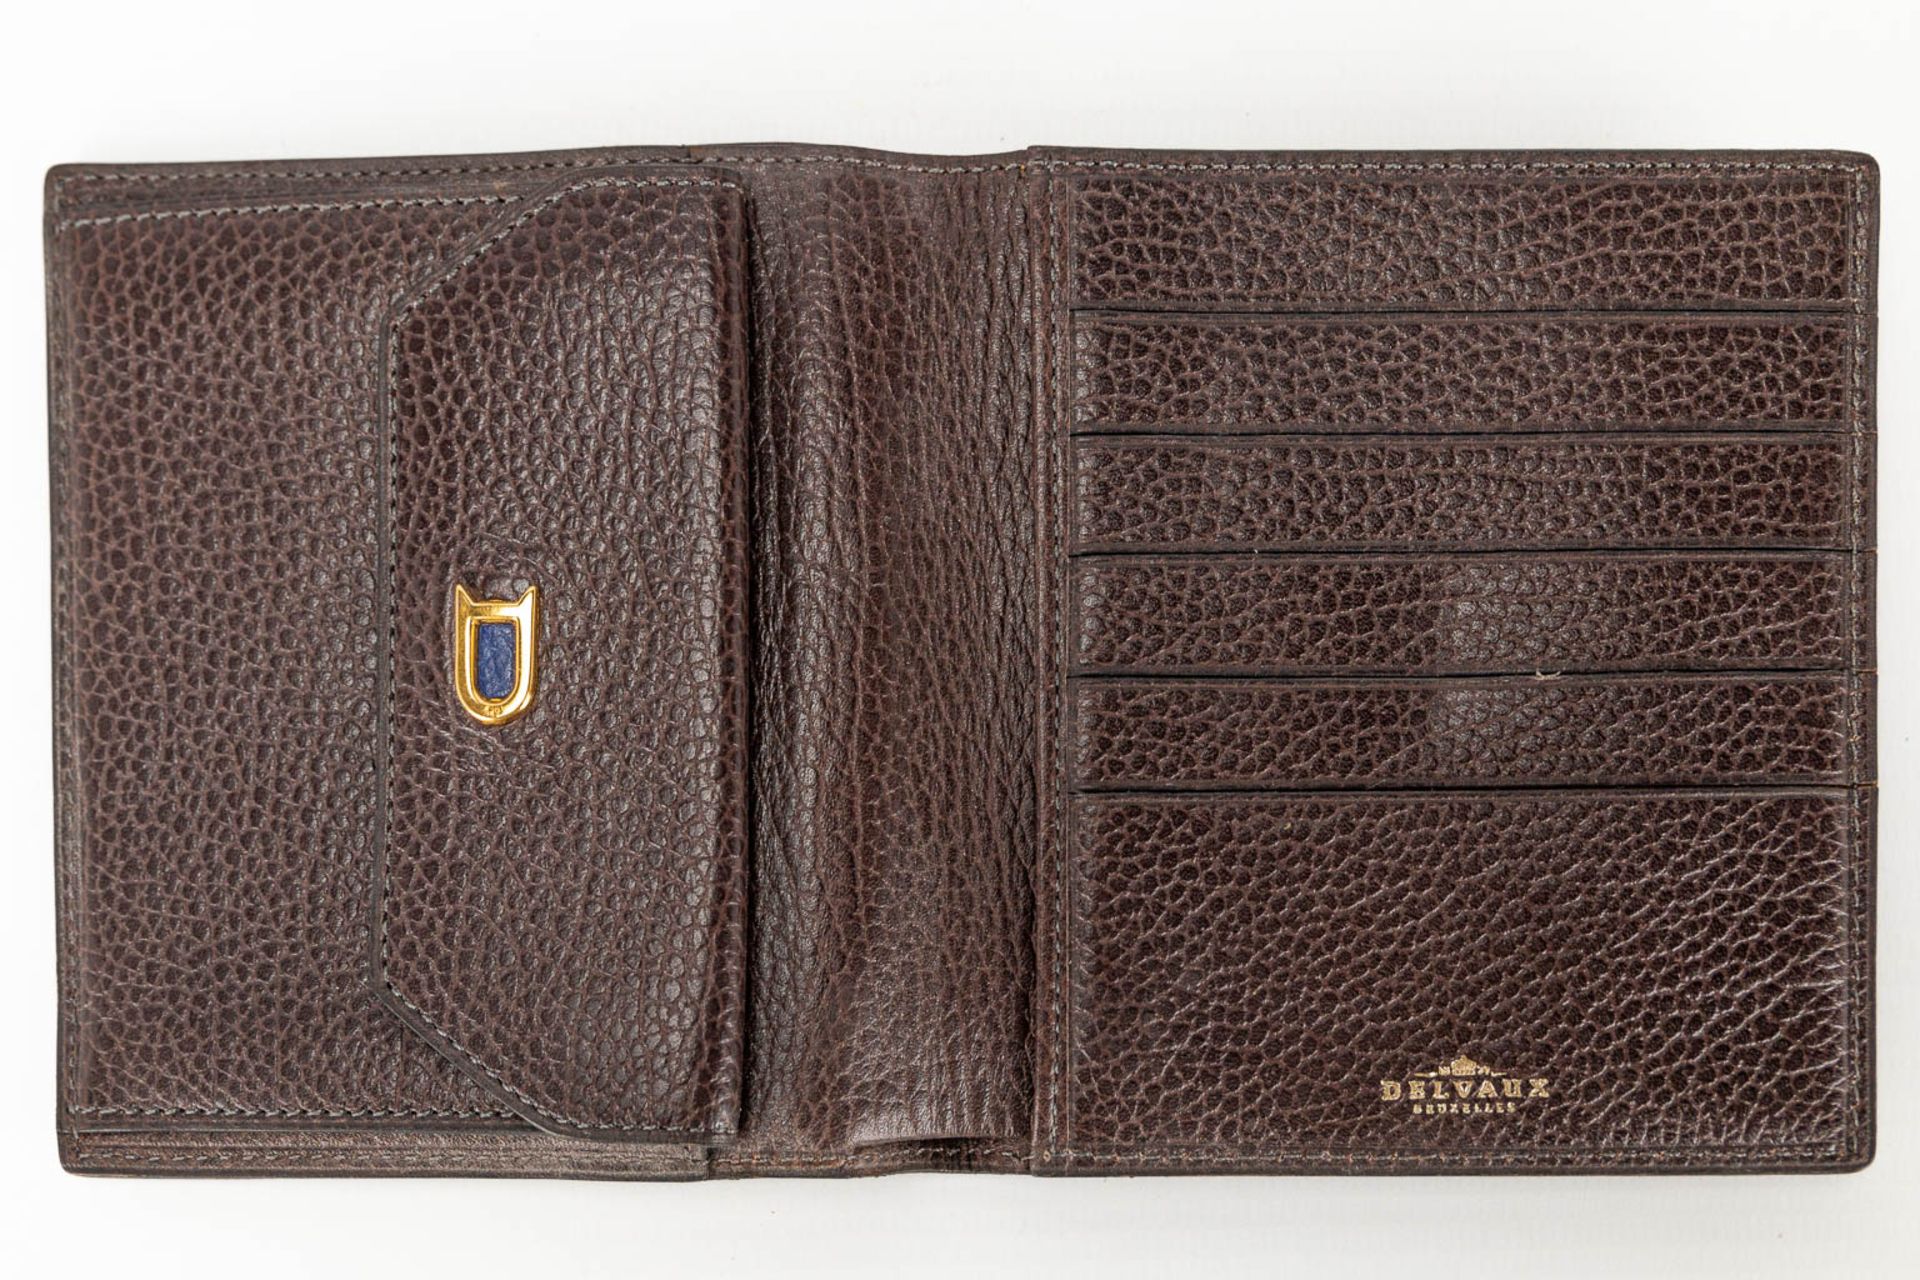 A collection of 2 wallets and a bifold made of leather and marked Delvaux. - Image 13 of 16